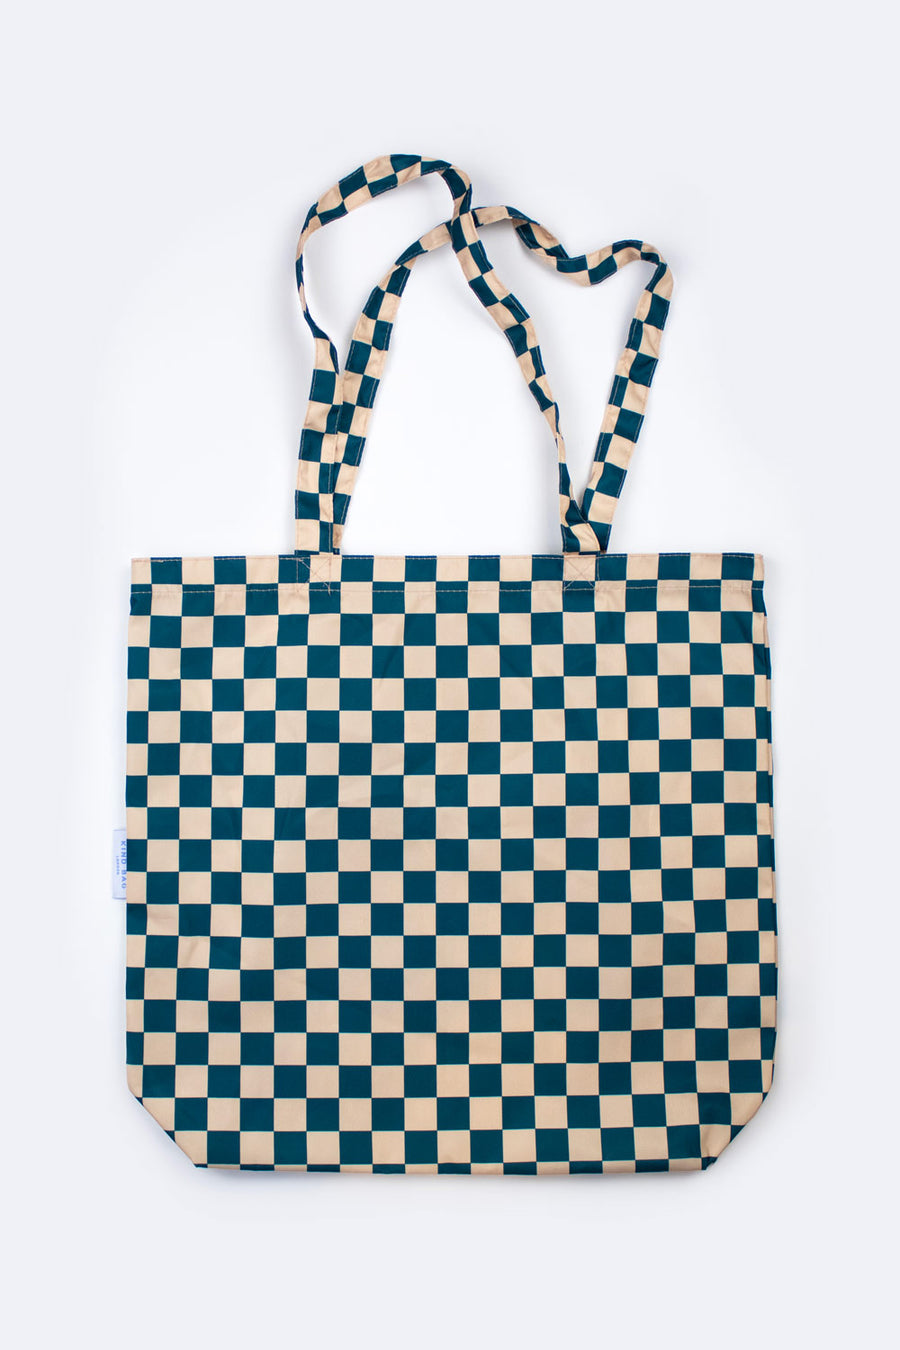 Checkerboard Teal & Beige | Recycled Tote